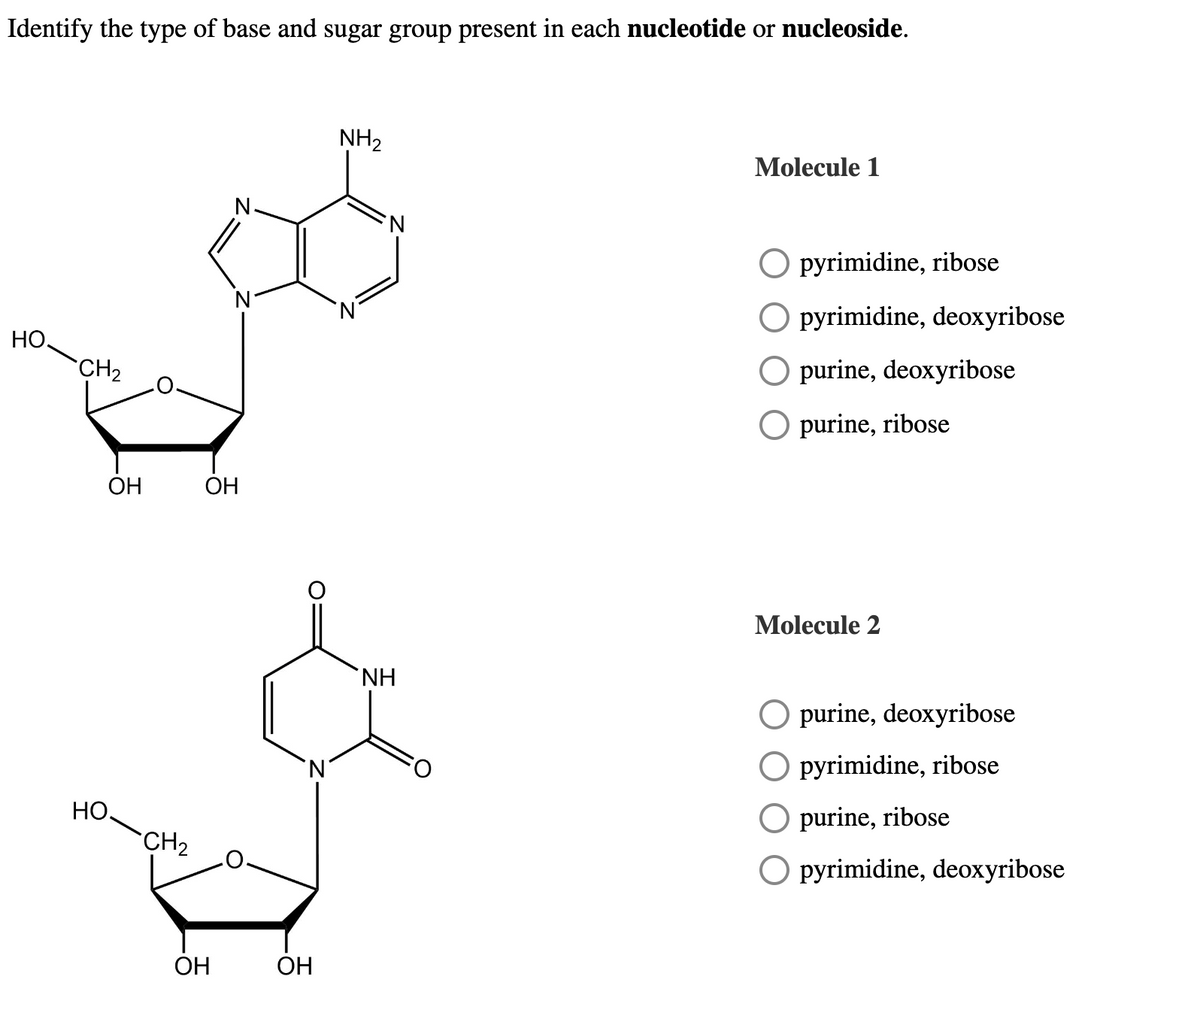 Identify the type of base and sugar group present in each nucleotide or nucleoside.
HO
CH₂
OH
но.
CH₂
OH
OH
'N
OH
NH₂
'N
NH
Molecule 1
O pyrimidine, ribose
O pyrimidine, deoxyribose
O purine, deoxyribose
purine, ribose
Molecule 2
O purine, deoxyribose
pyrimidine, ribose
purine, ribose
O pyrimidine, deoxyribose